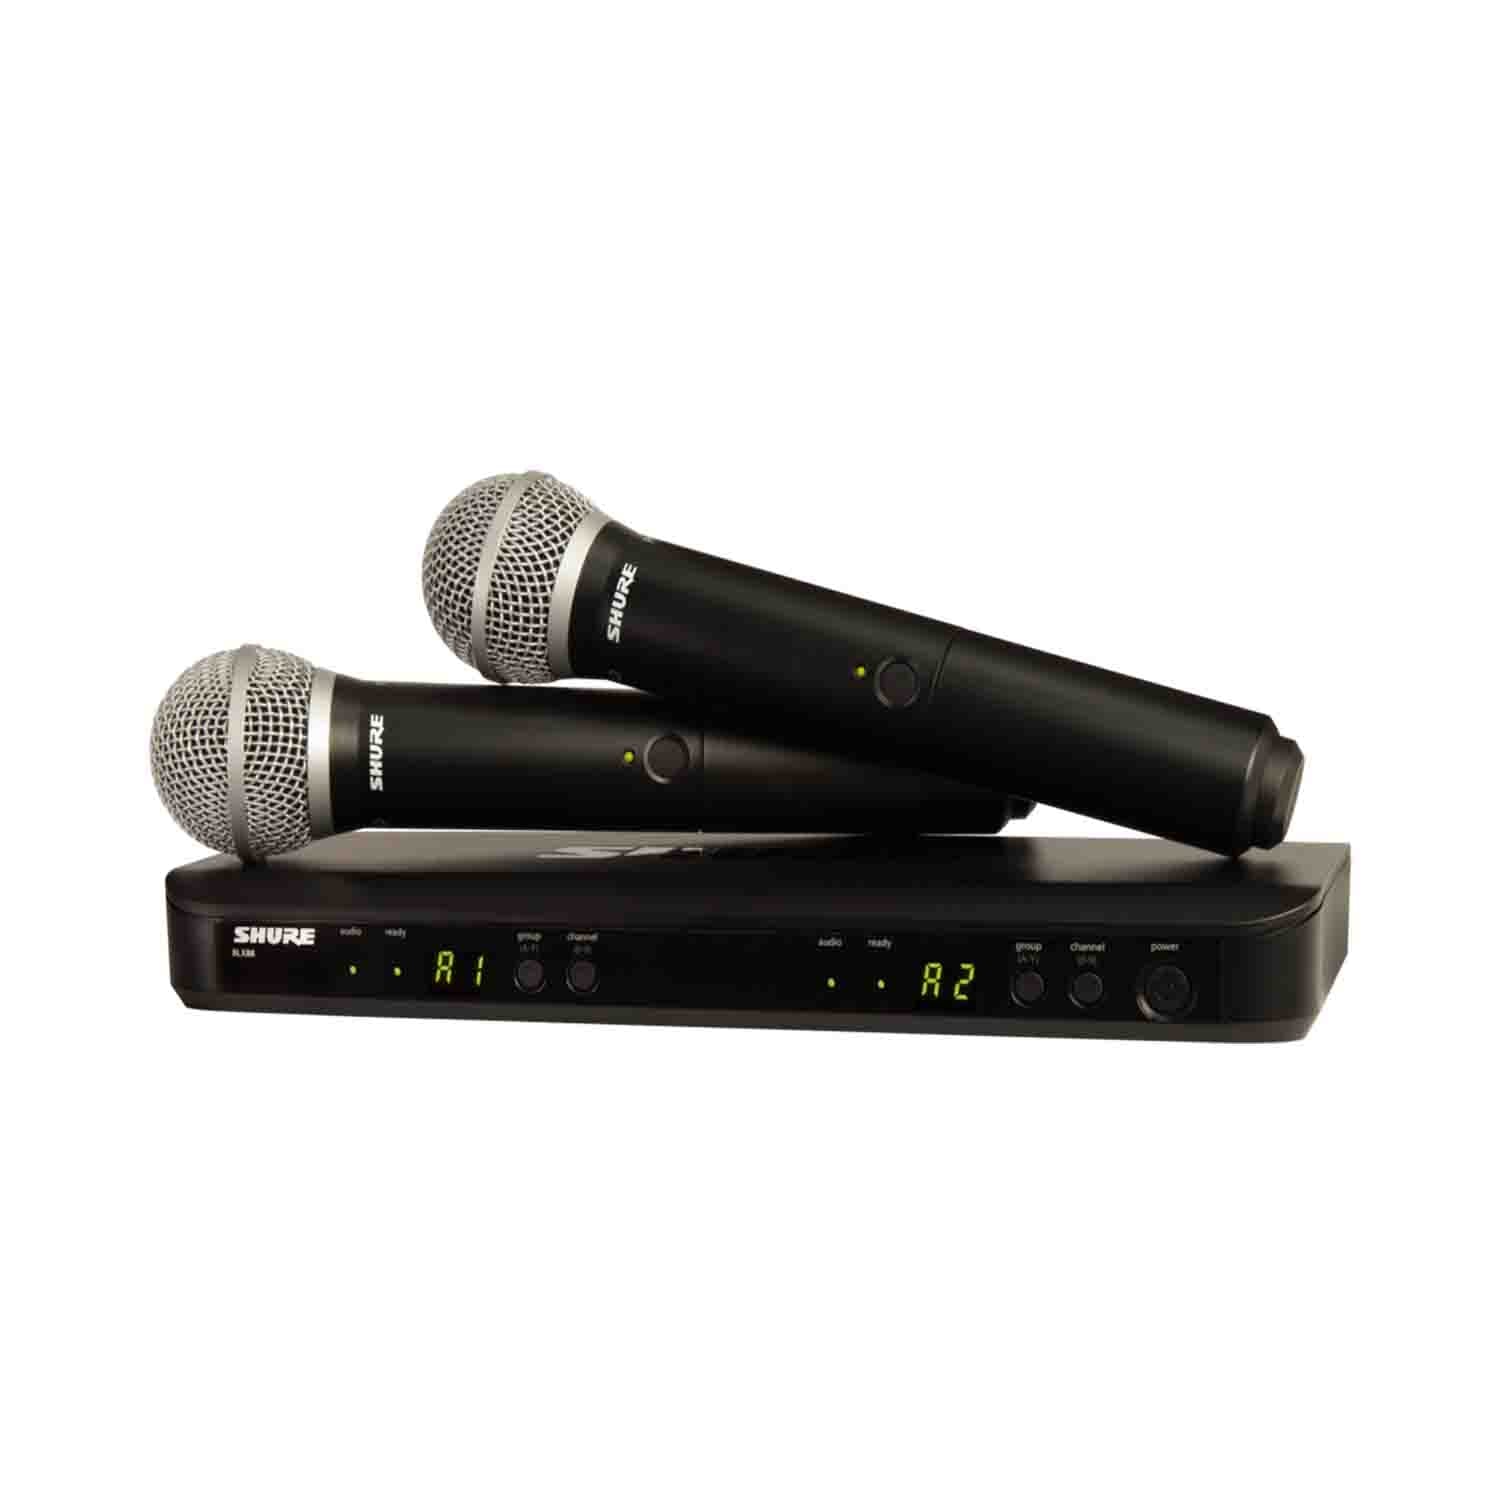 Shure BLX288/PG58 Dual Handheld Wireless Microphones System with two PG58 Transmitters - Hollywood DJ